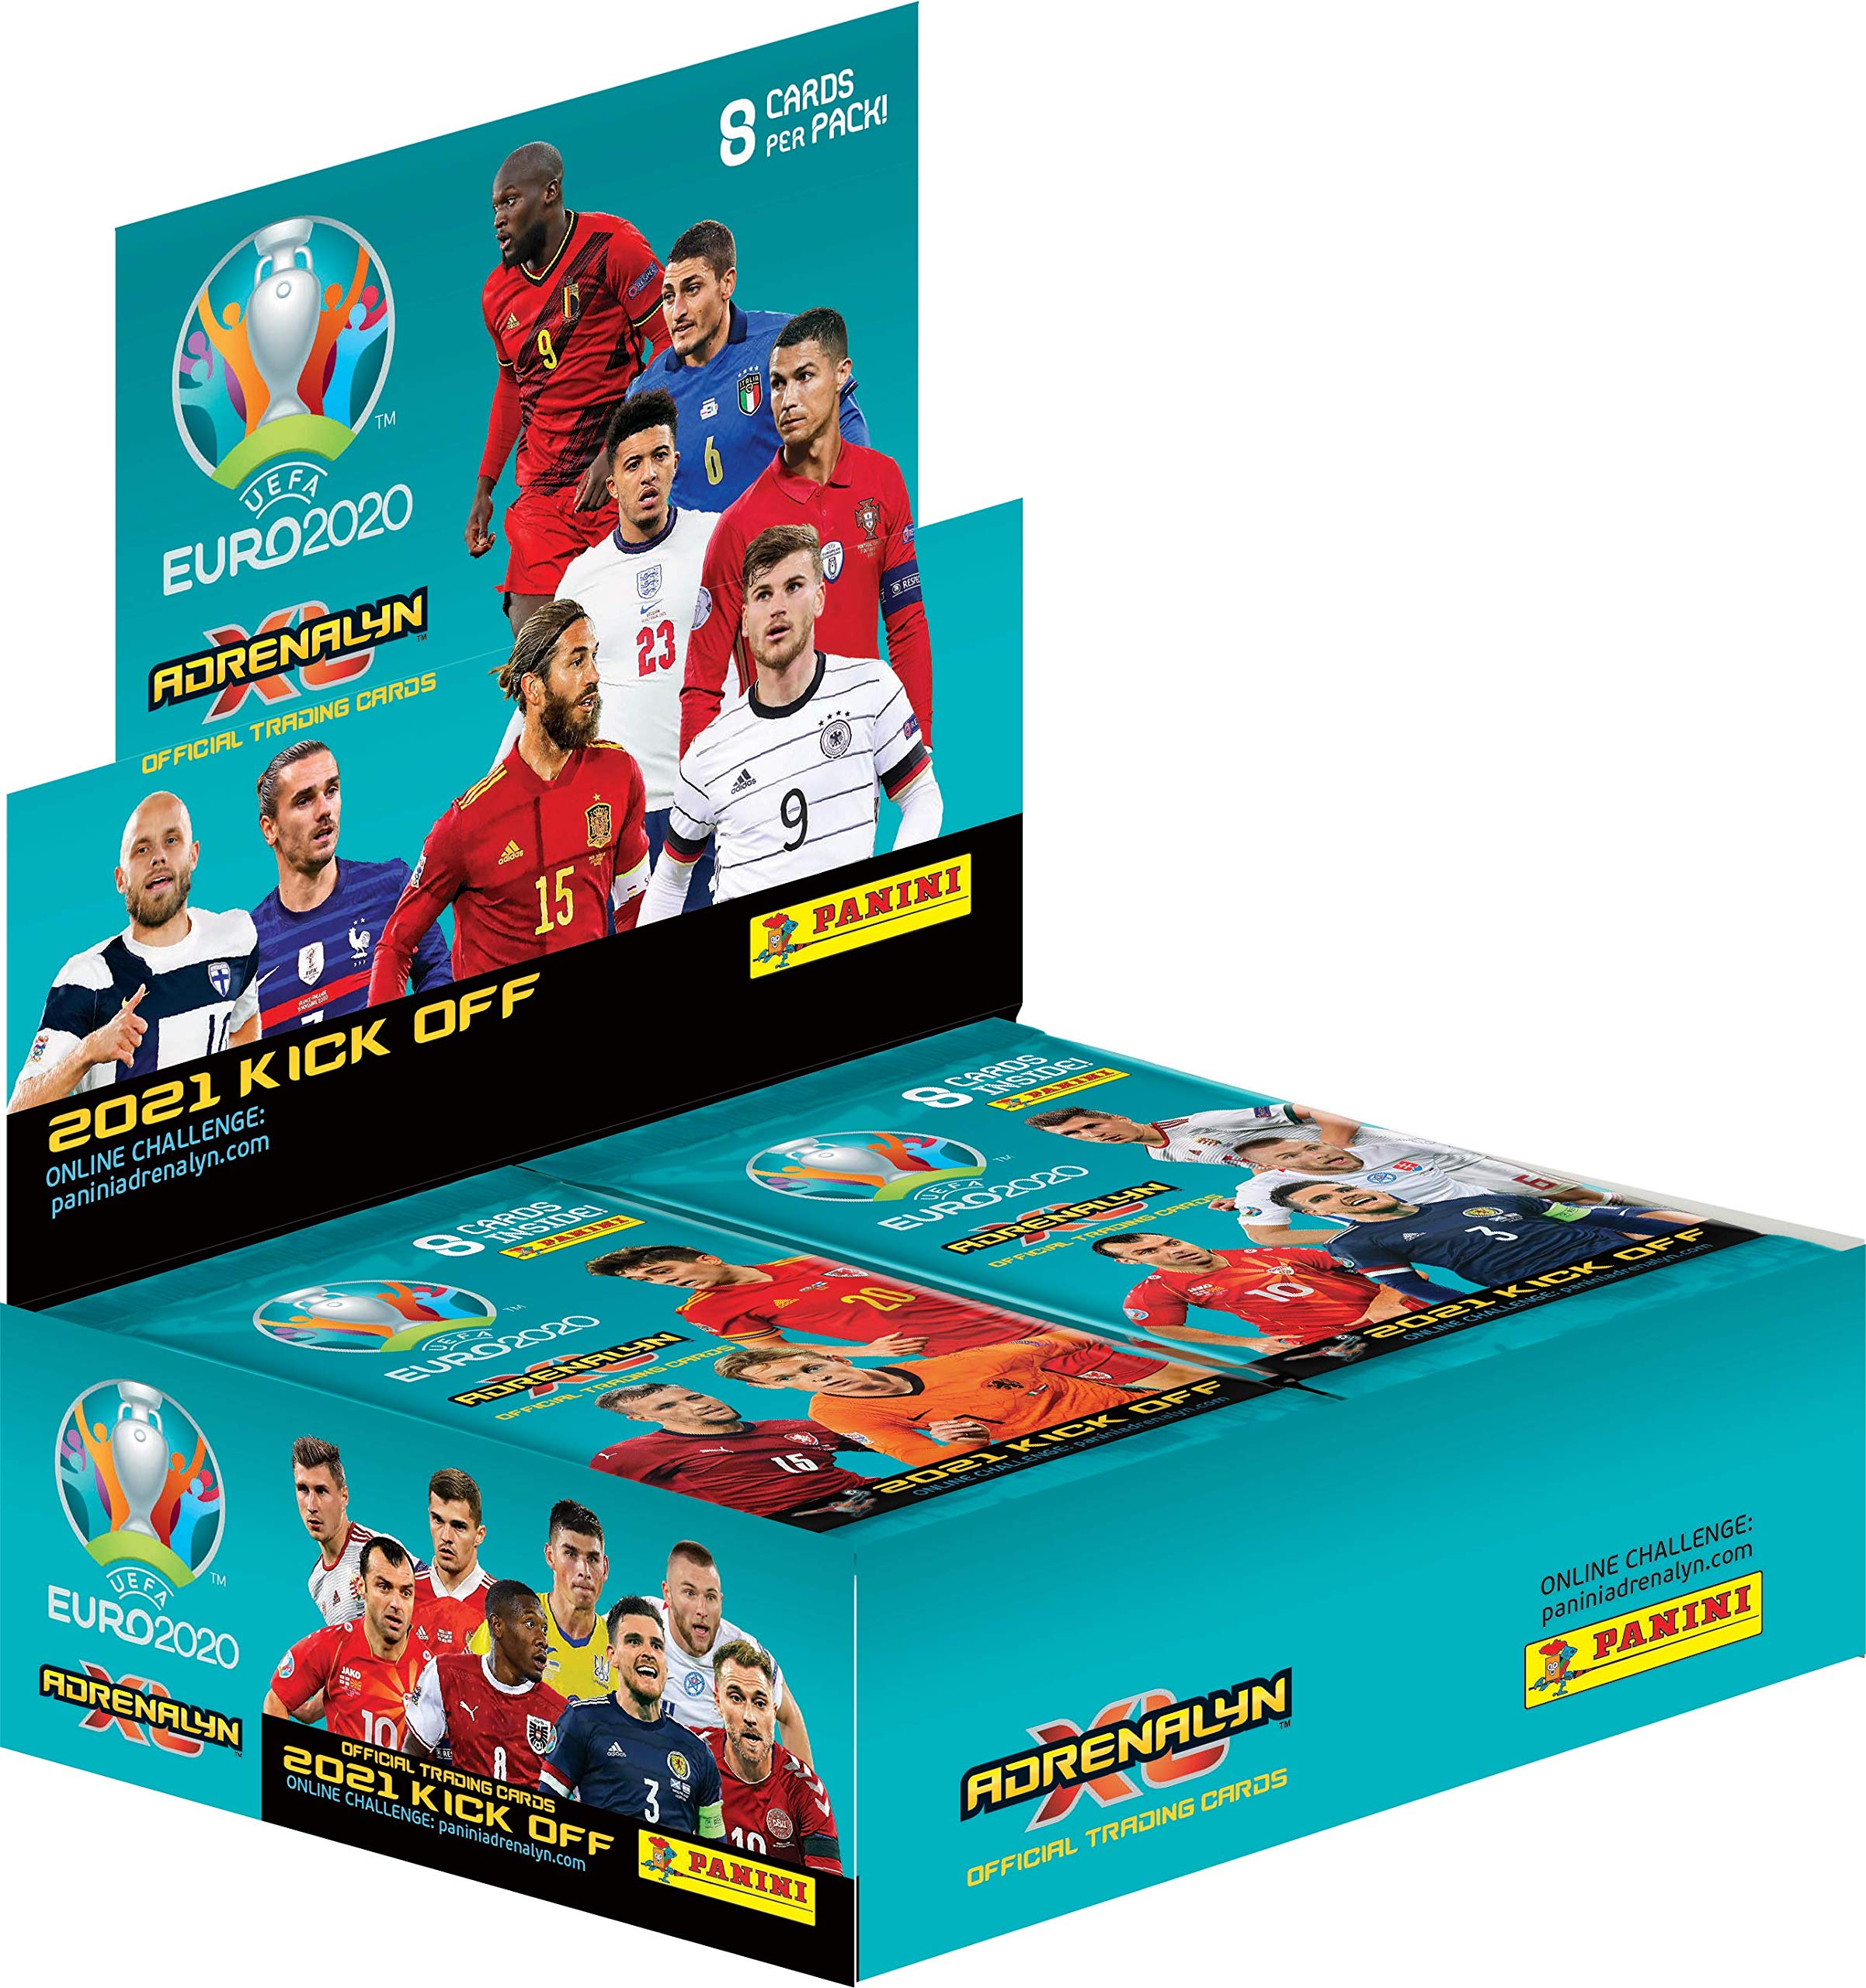 Panini UEFA EURO 2020™ Adrenalyn XL™ 2021 Kick Off official trading cards collection - Box